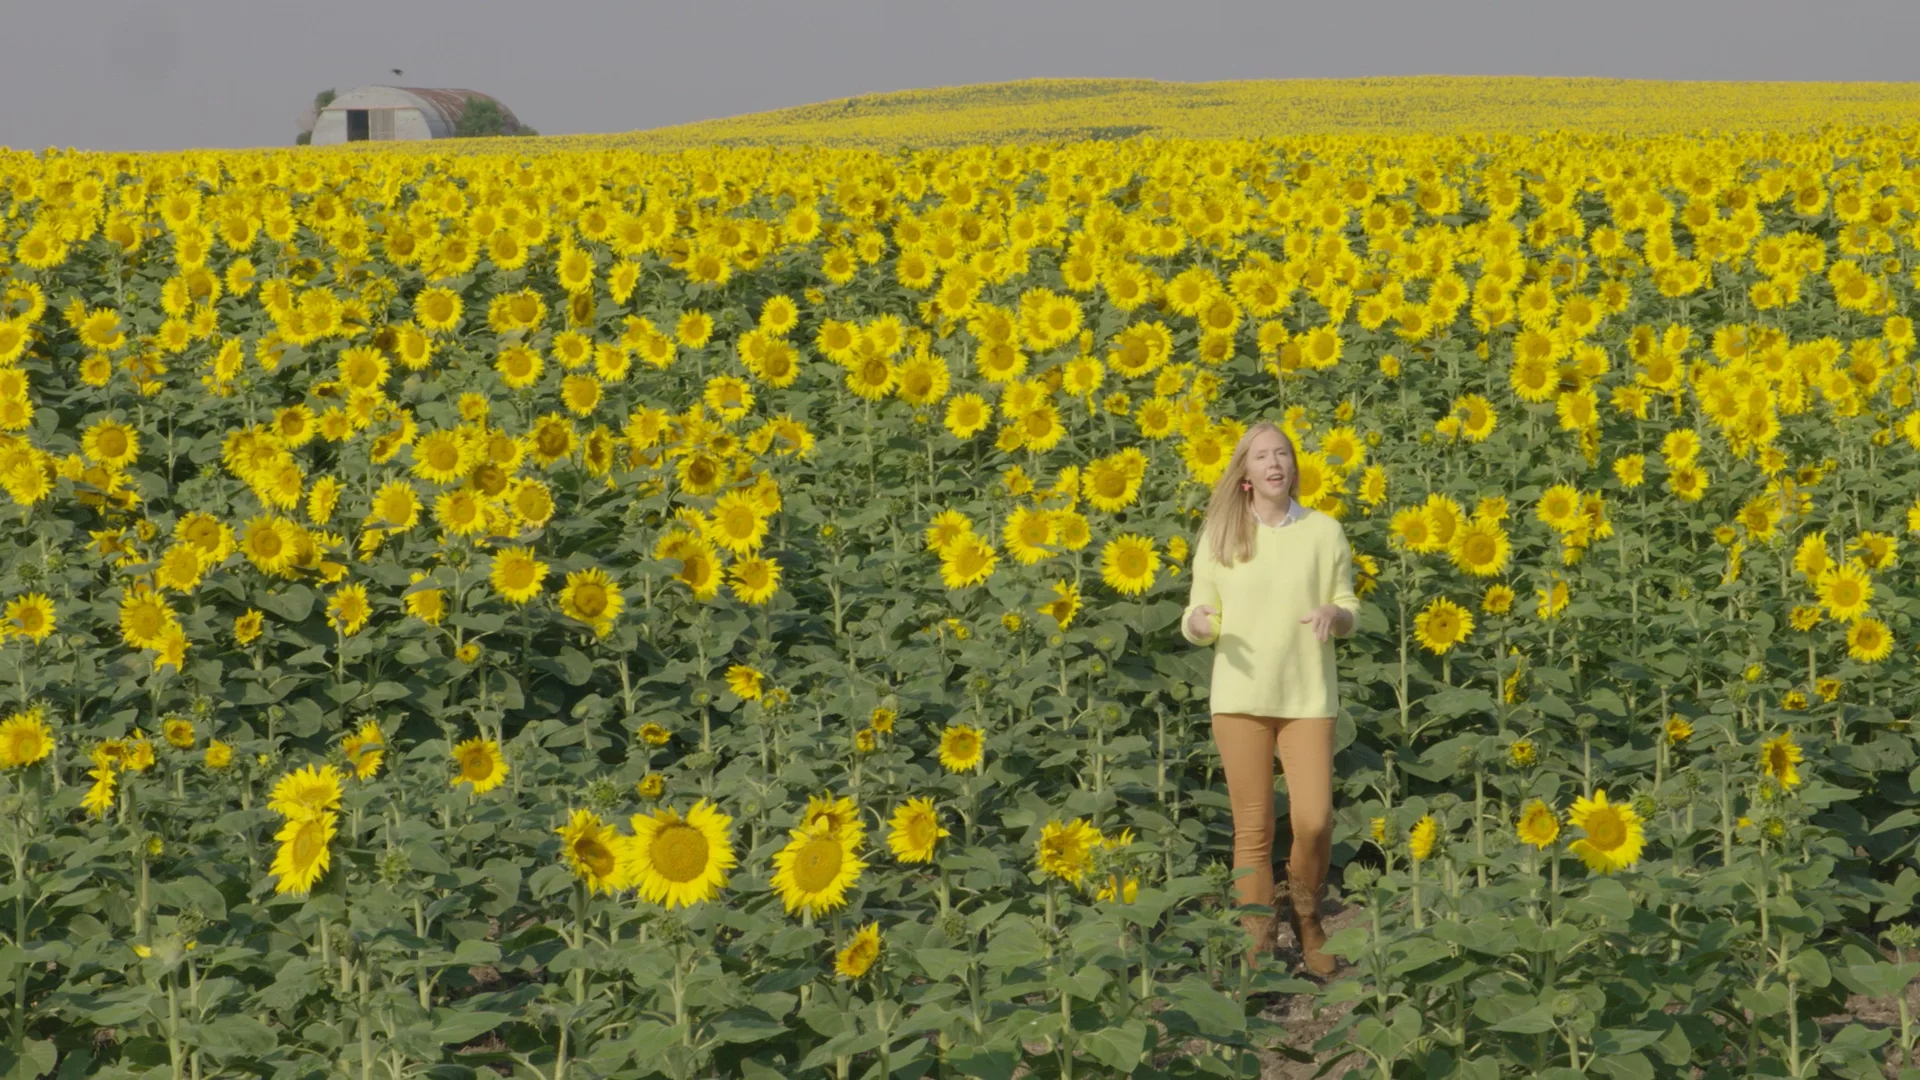 North Dakota Chasing Sunflowers: Travels with Darley :60 Preview on Vimeo